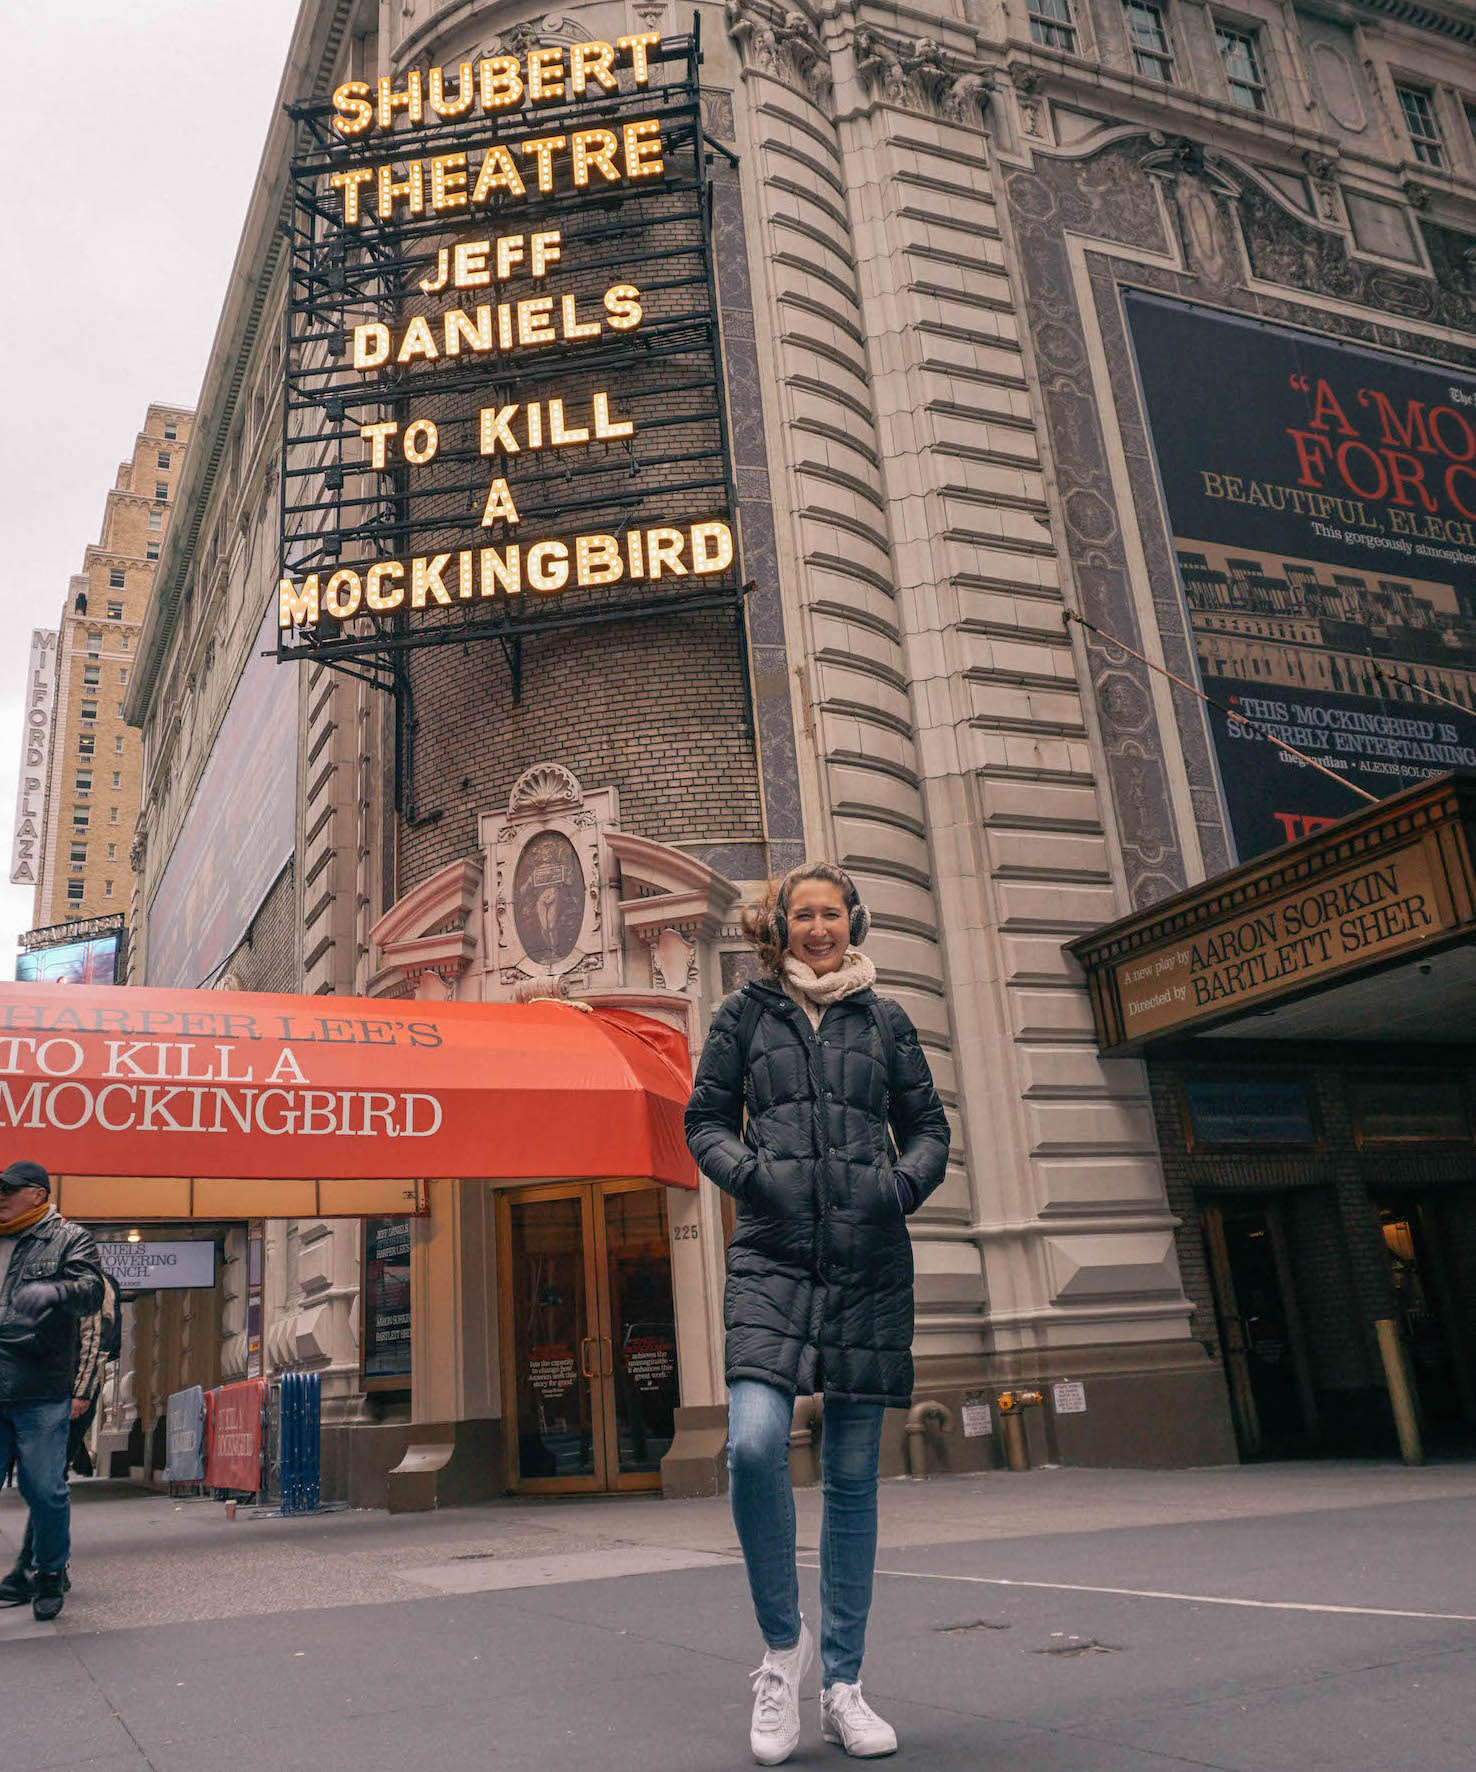 Woman smiling down at camera in front of Broadway show sign. 